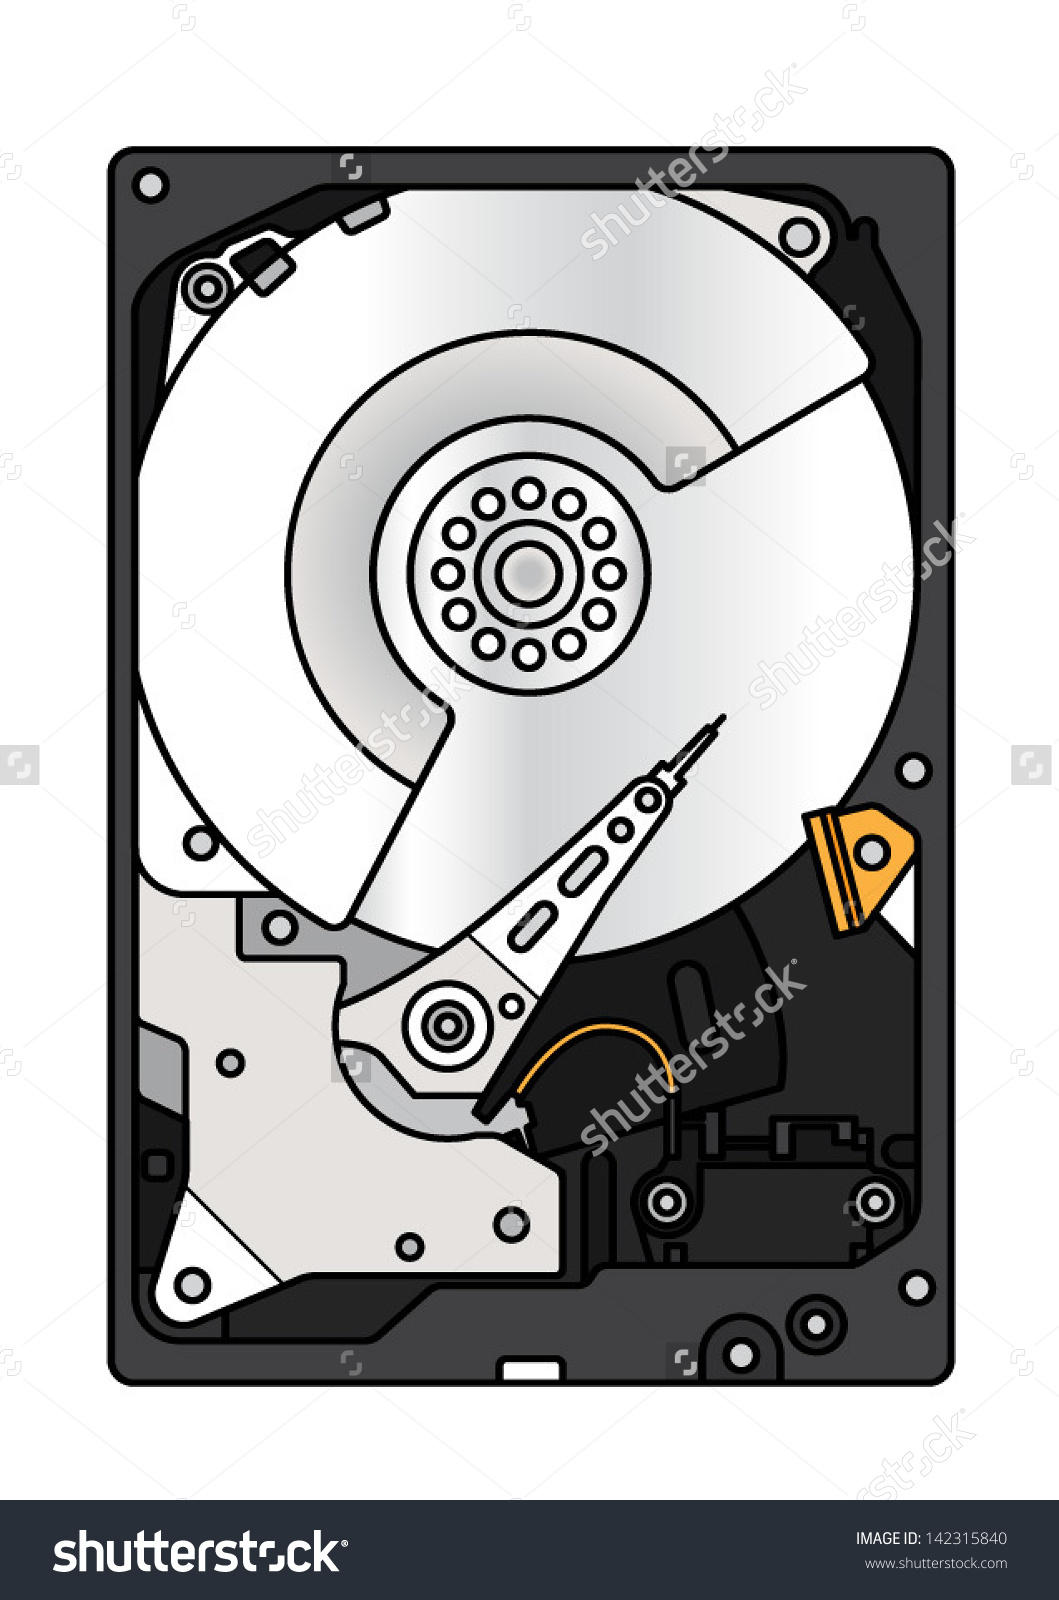 Hard Disk Drive Hdd Exposed Innards Stock Vector 142315840.